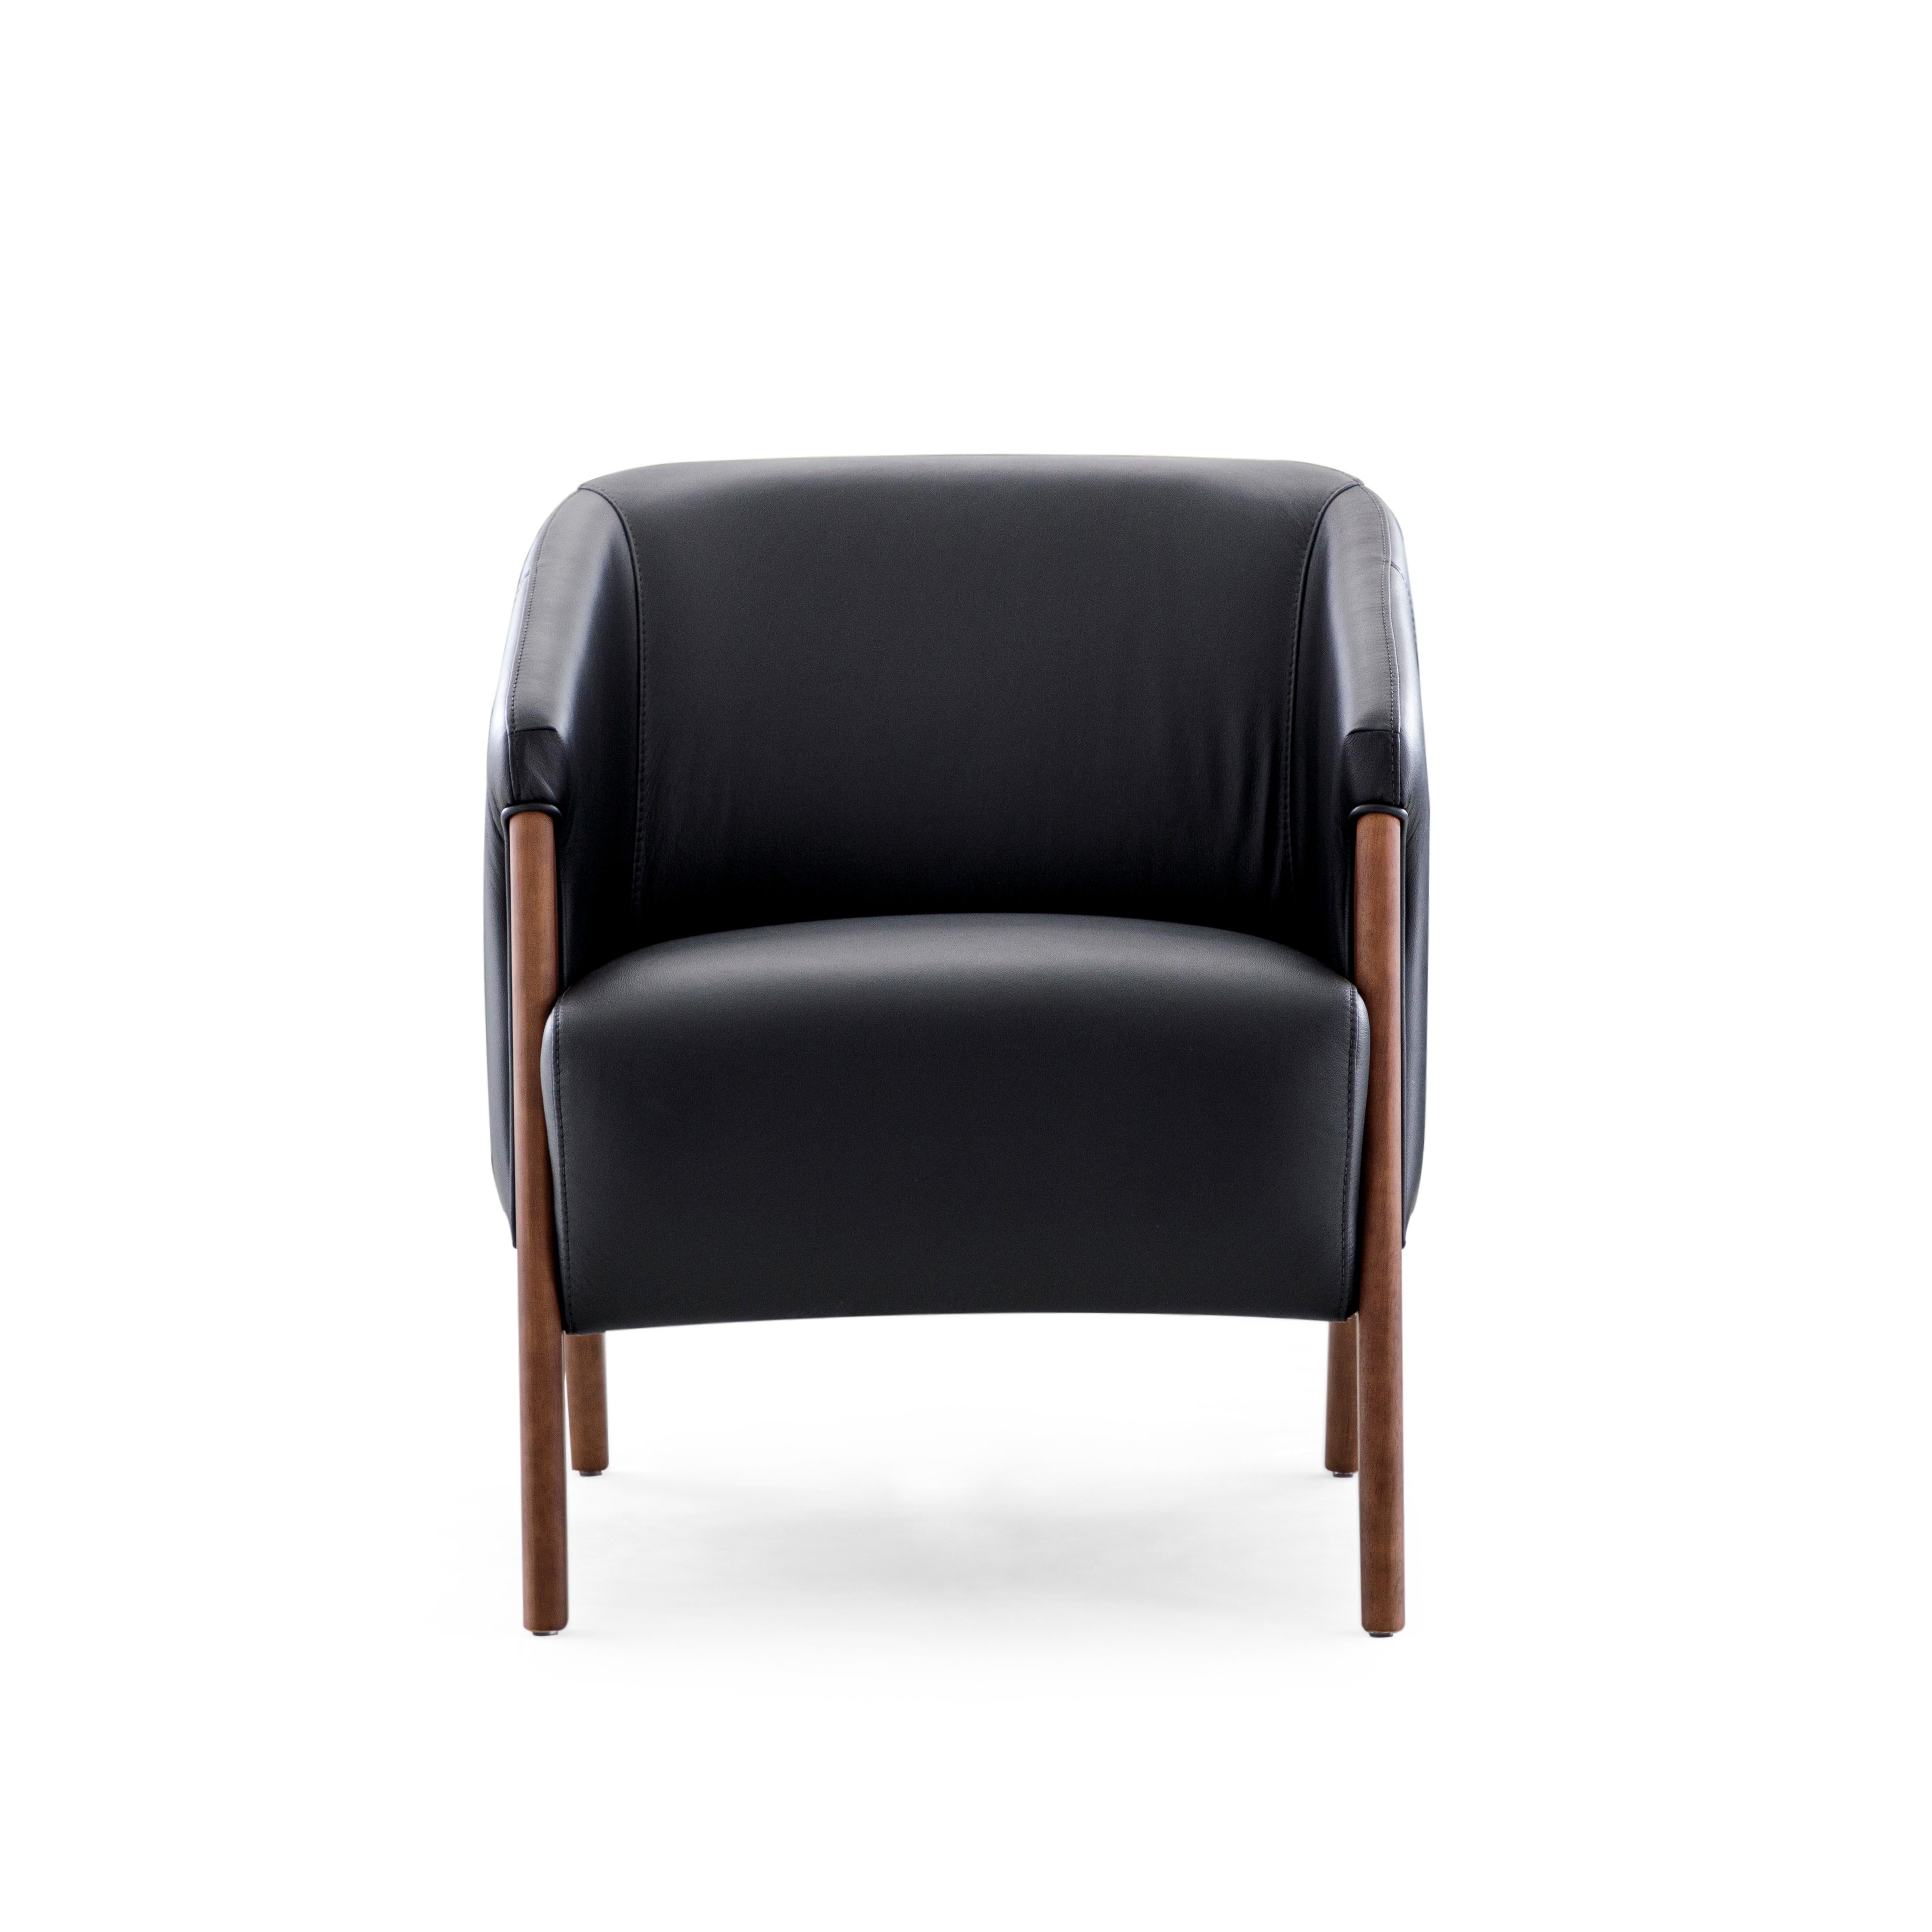 Abra Armchair in Black Leather and Walnut Wood Finish For Sale 1